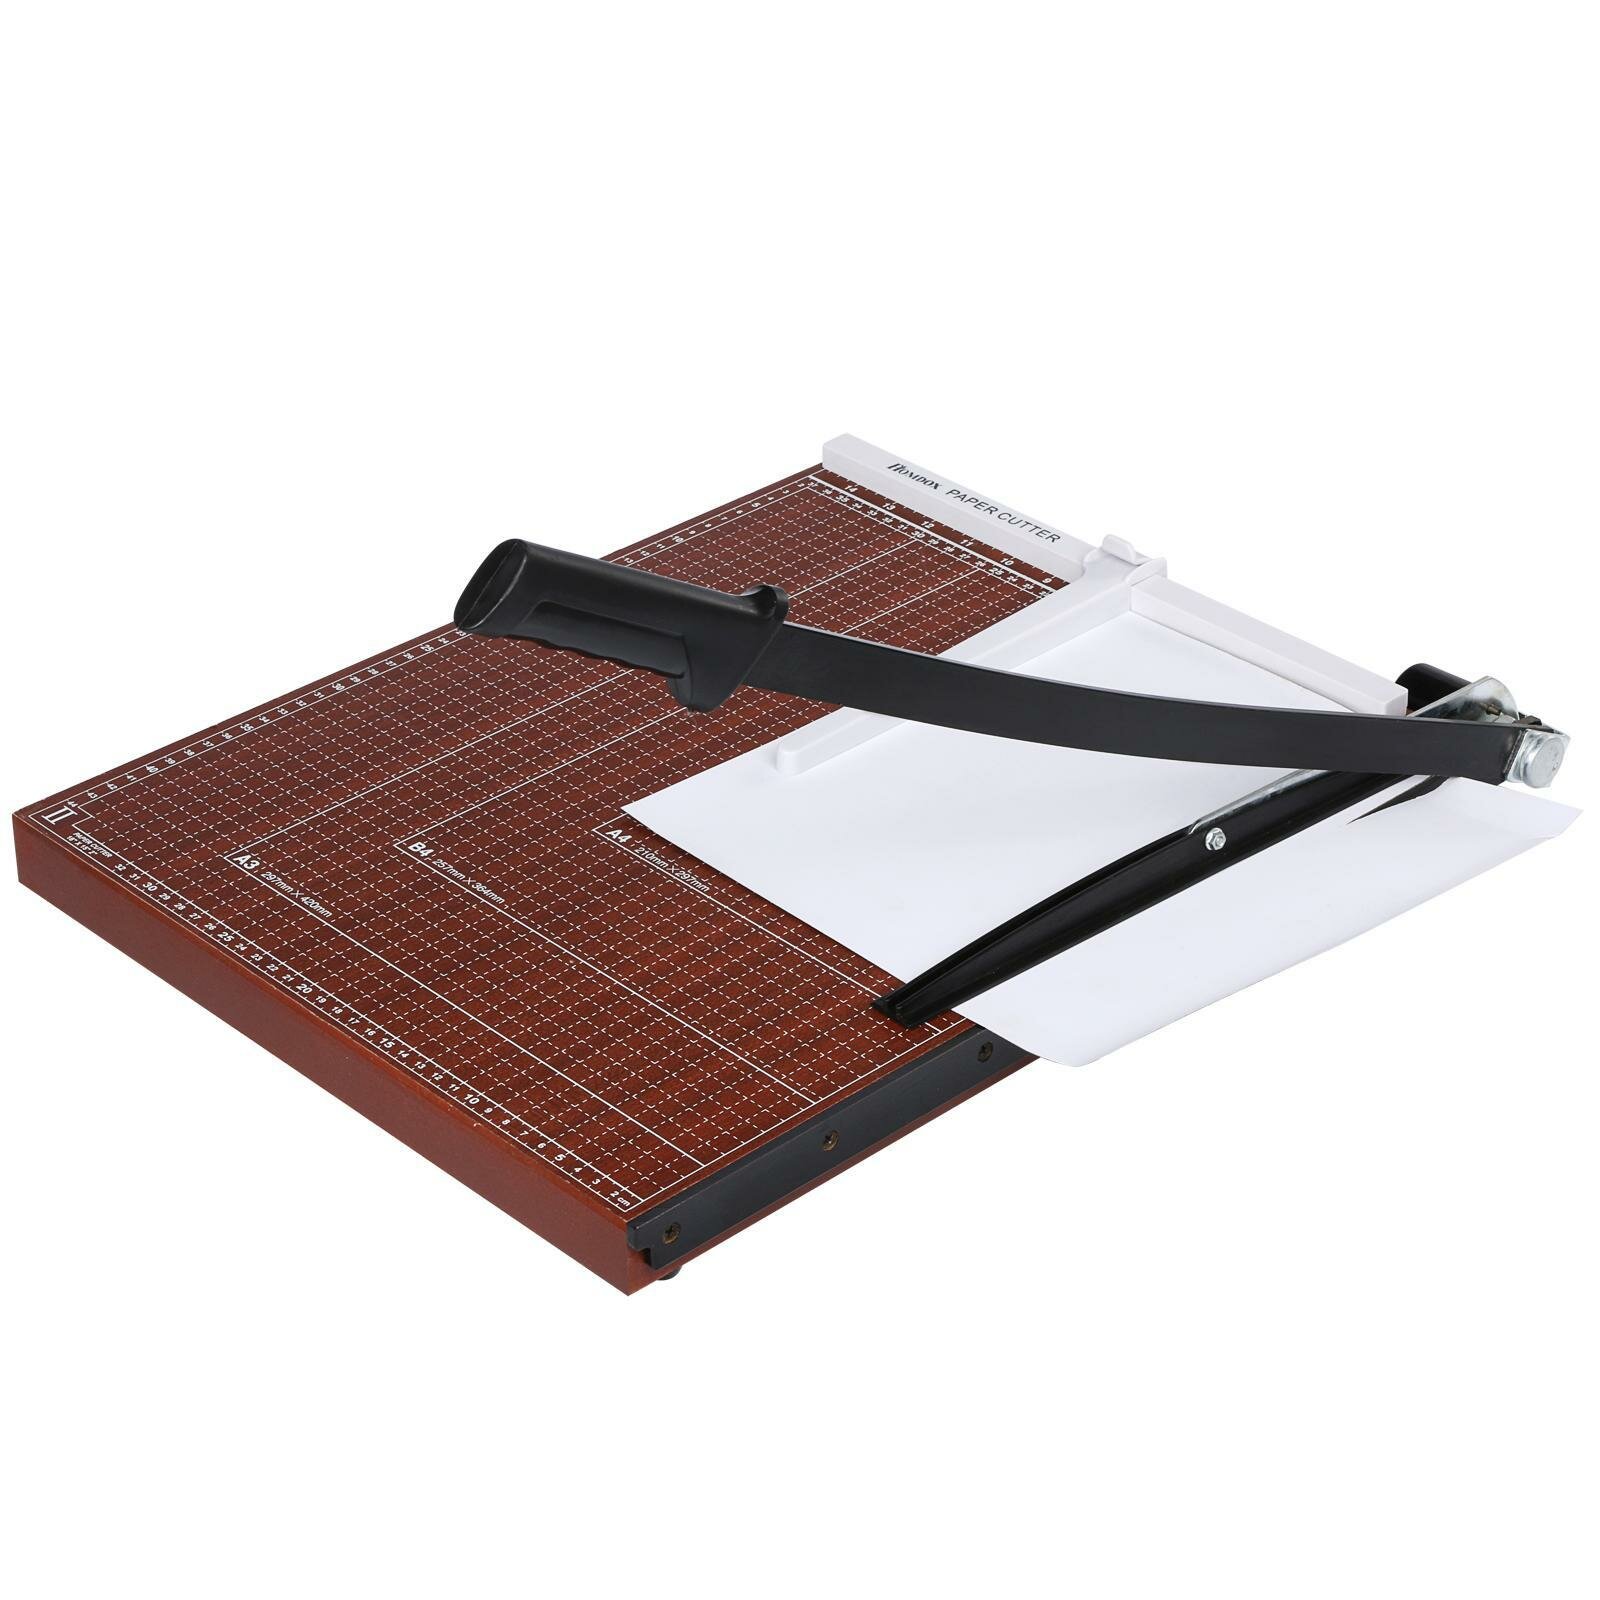 Homdox Paper Cutter Heavy Duty 18 Cut Length Professional Large Paper Cutter 12-Sheet Capacity Guillotine Paper Cutter for Cardstock, Safety